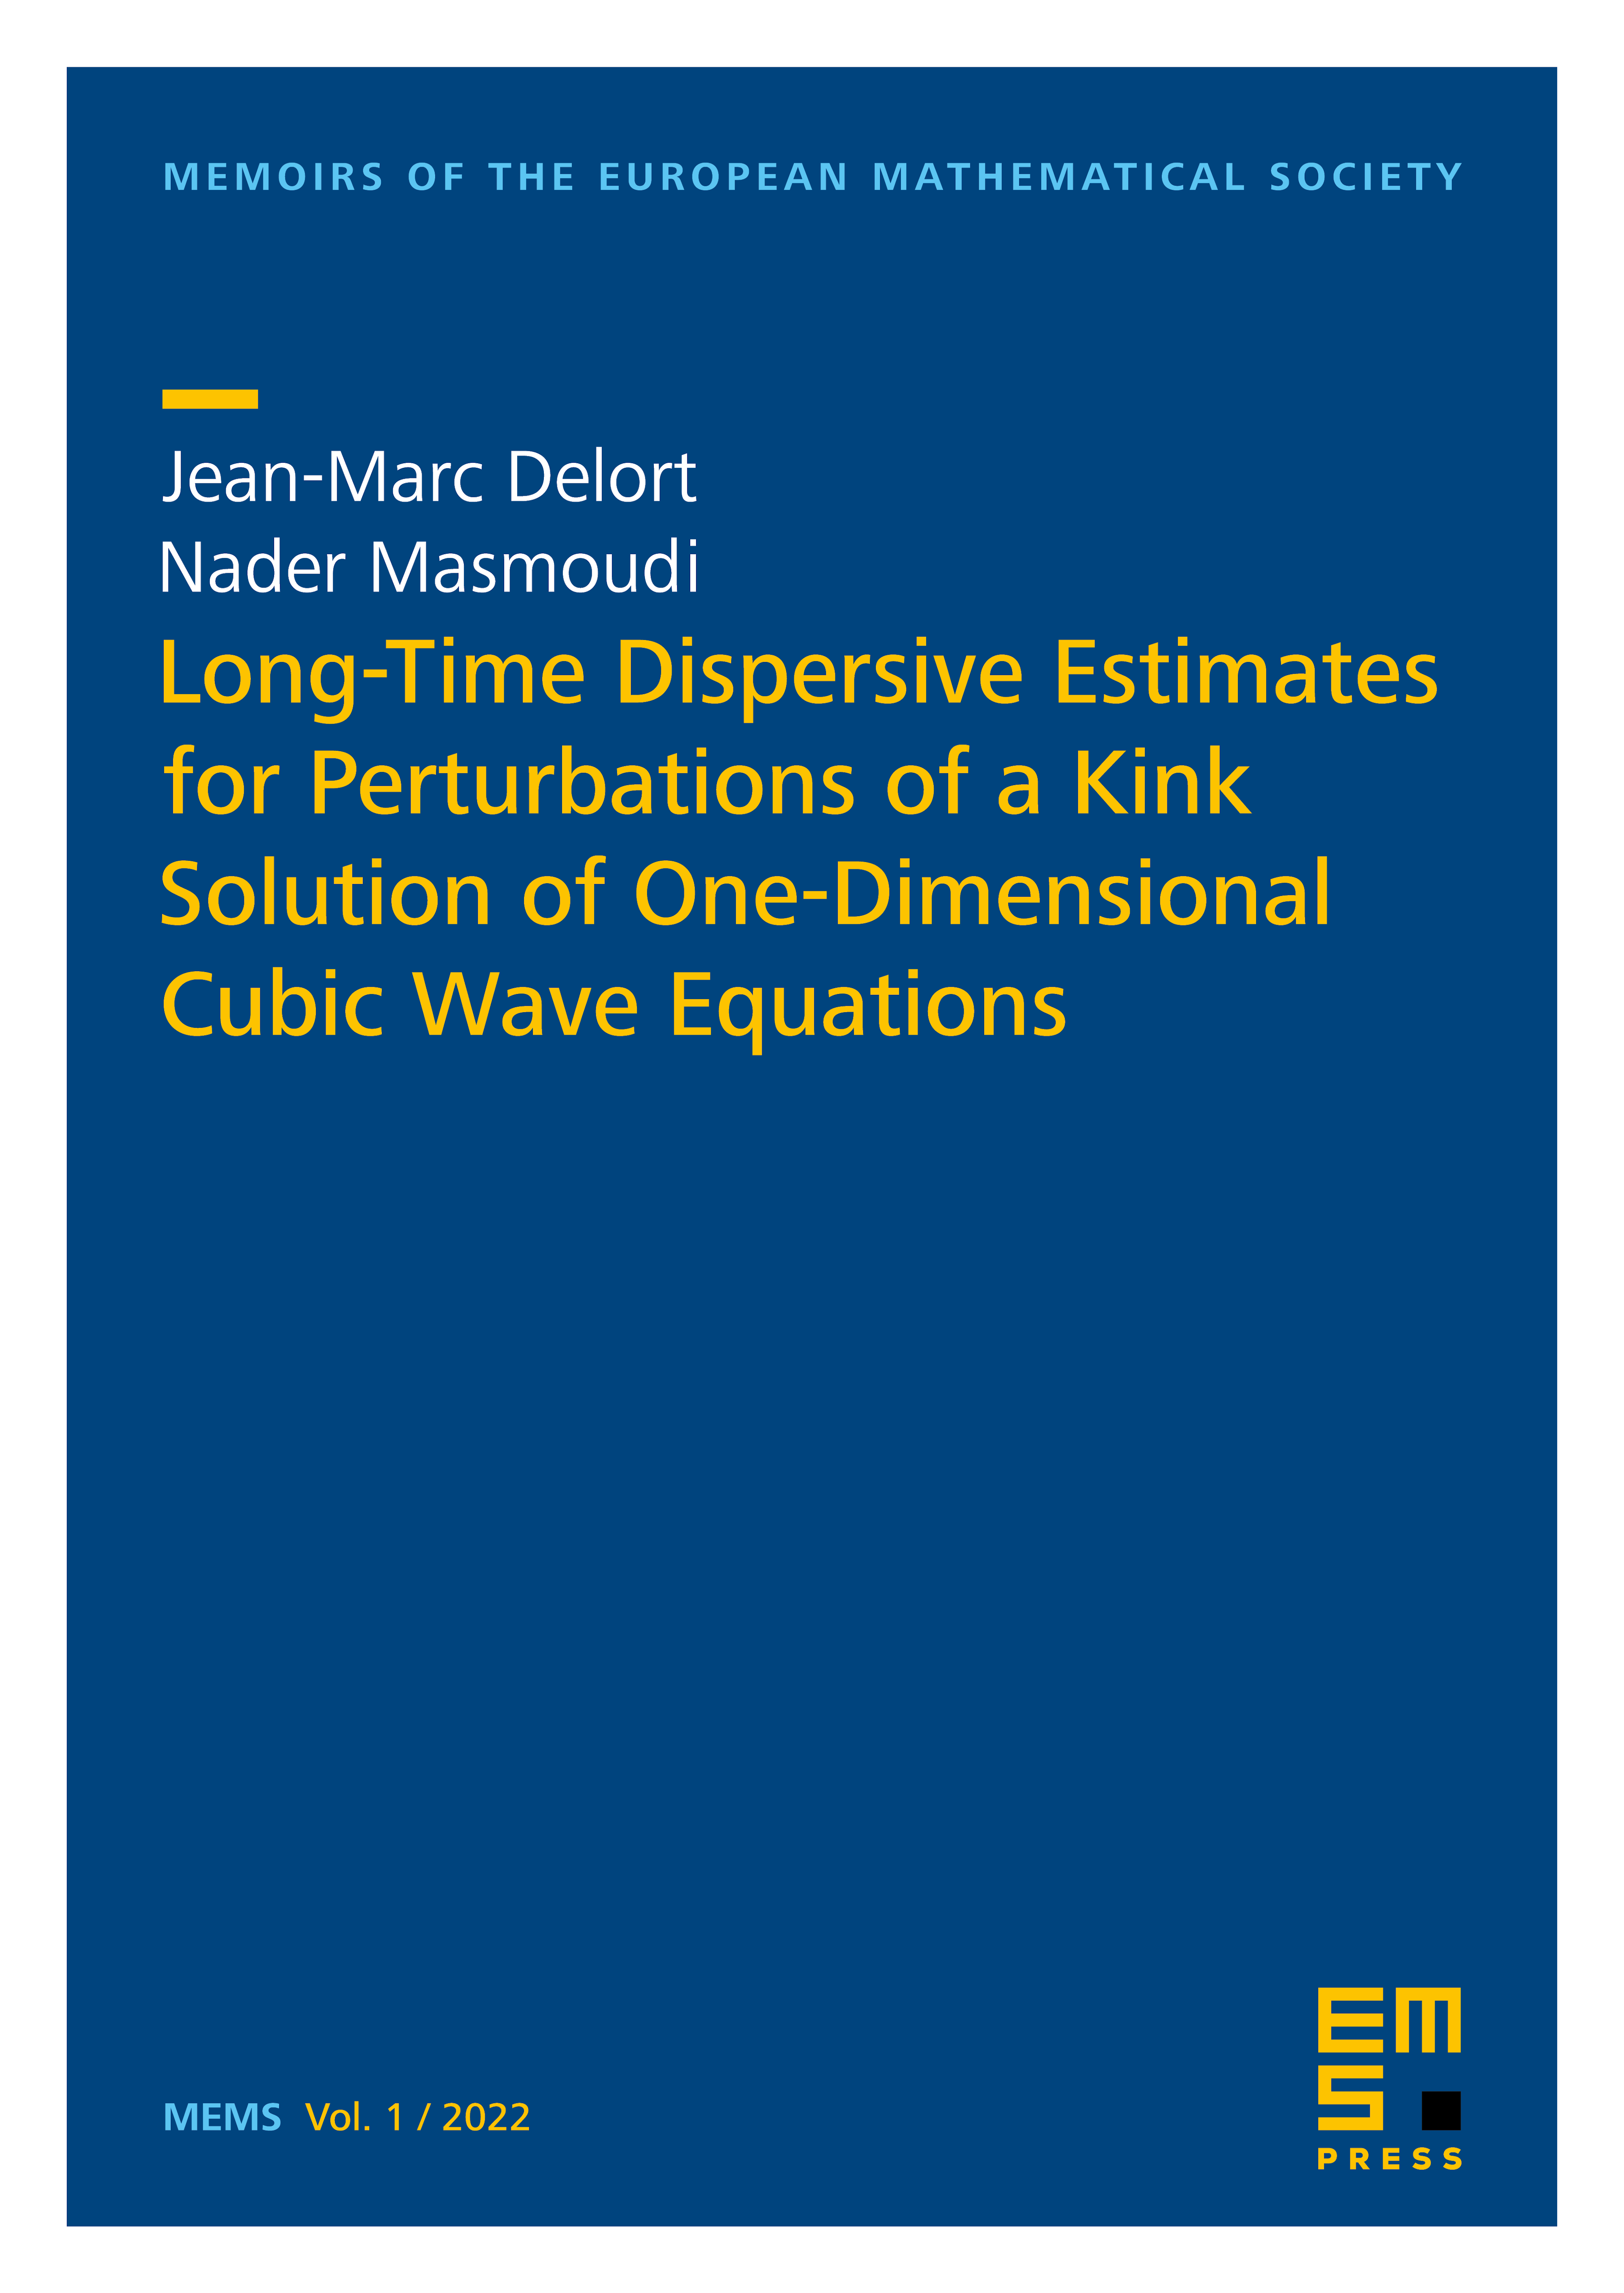 Long-Time Dispersive Estimates for Perturbations of a Kink Solution of One-Dimensional Cubic Wave Equations cover